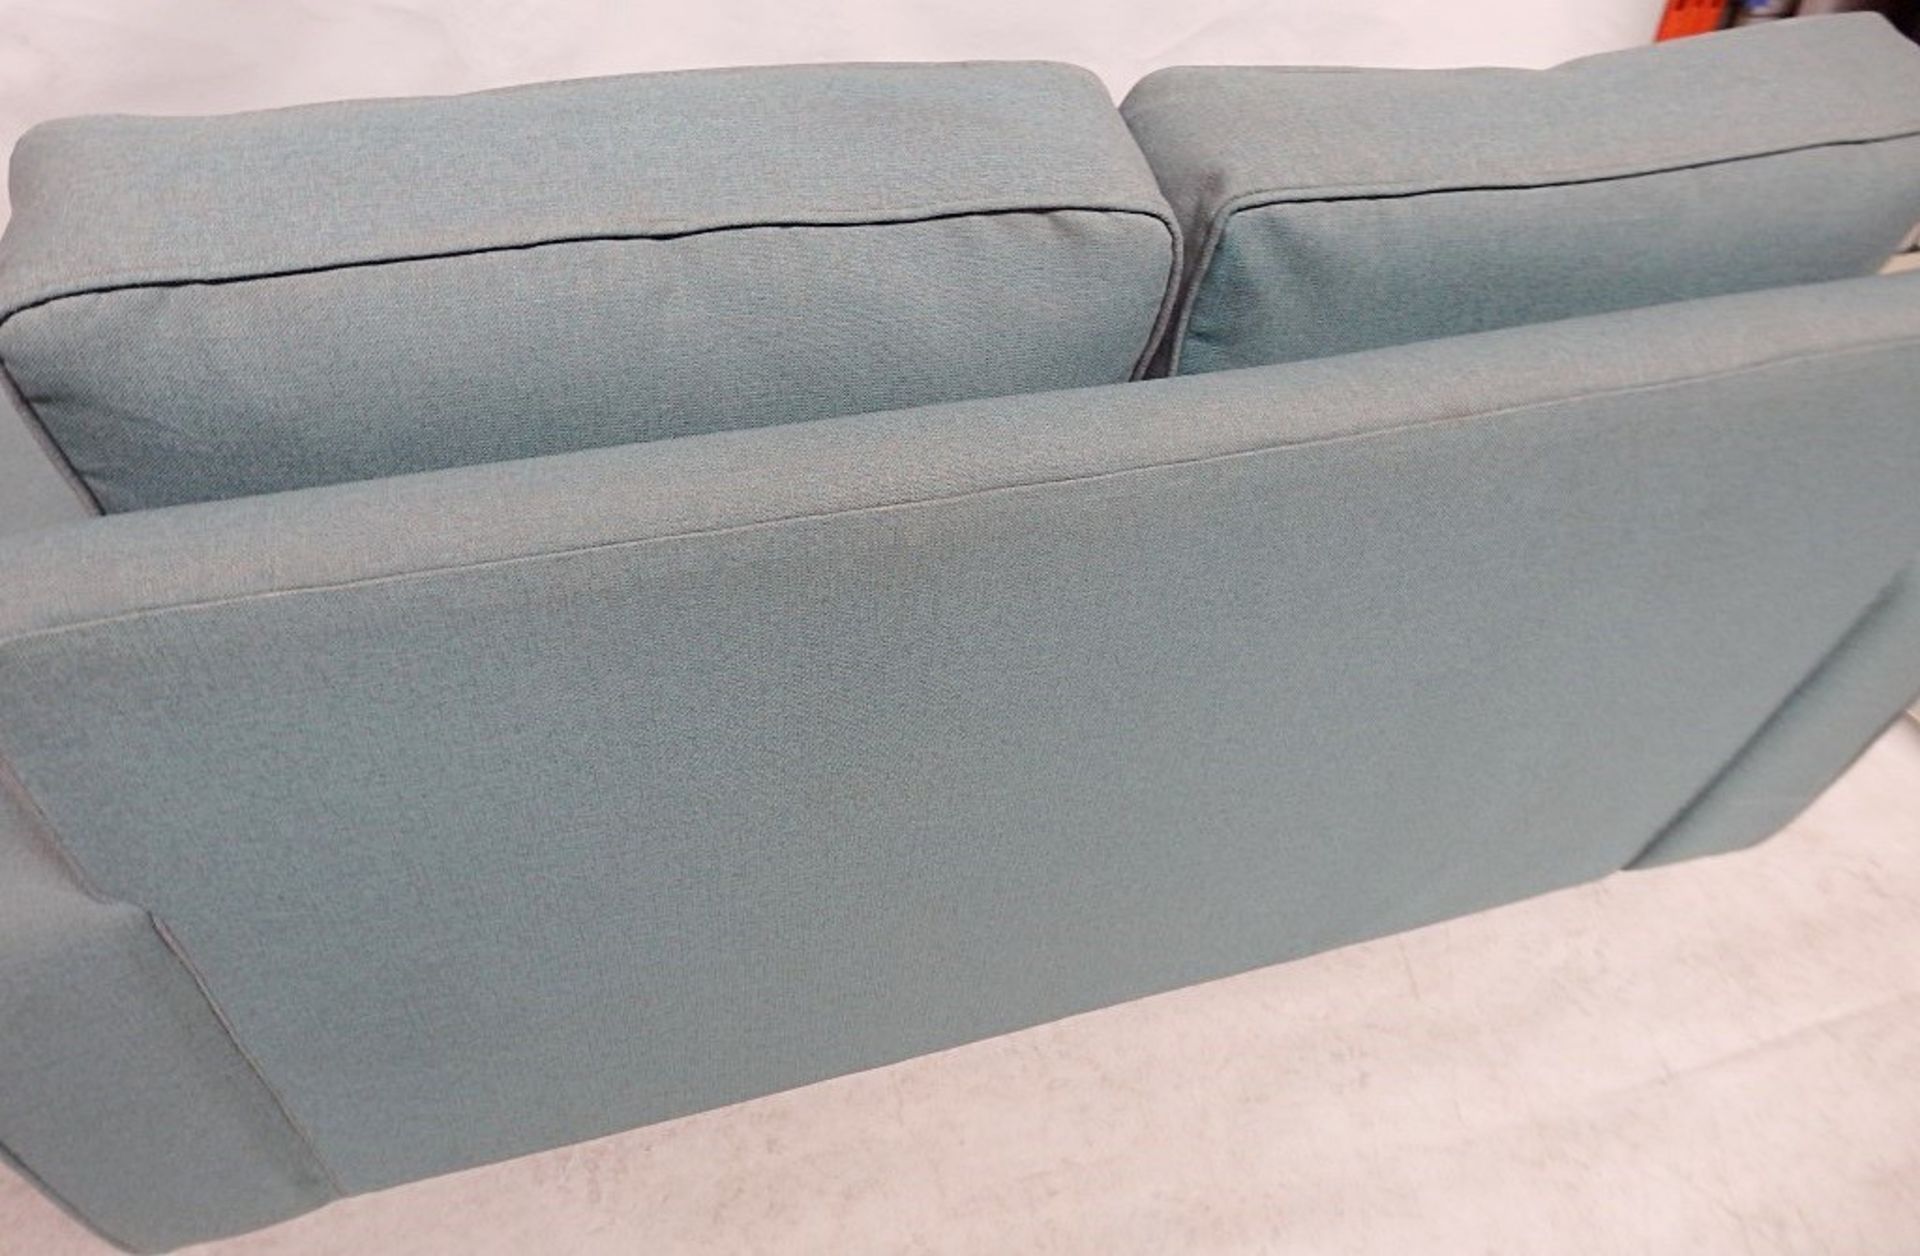 1 x Large Bespoke Turquoise Sofa - Expertly Built And Upholstered By British Craftsmen - Dimensions: - Image 2 of 6